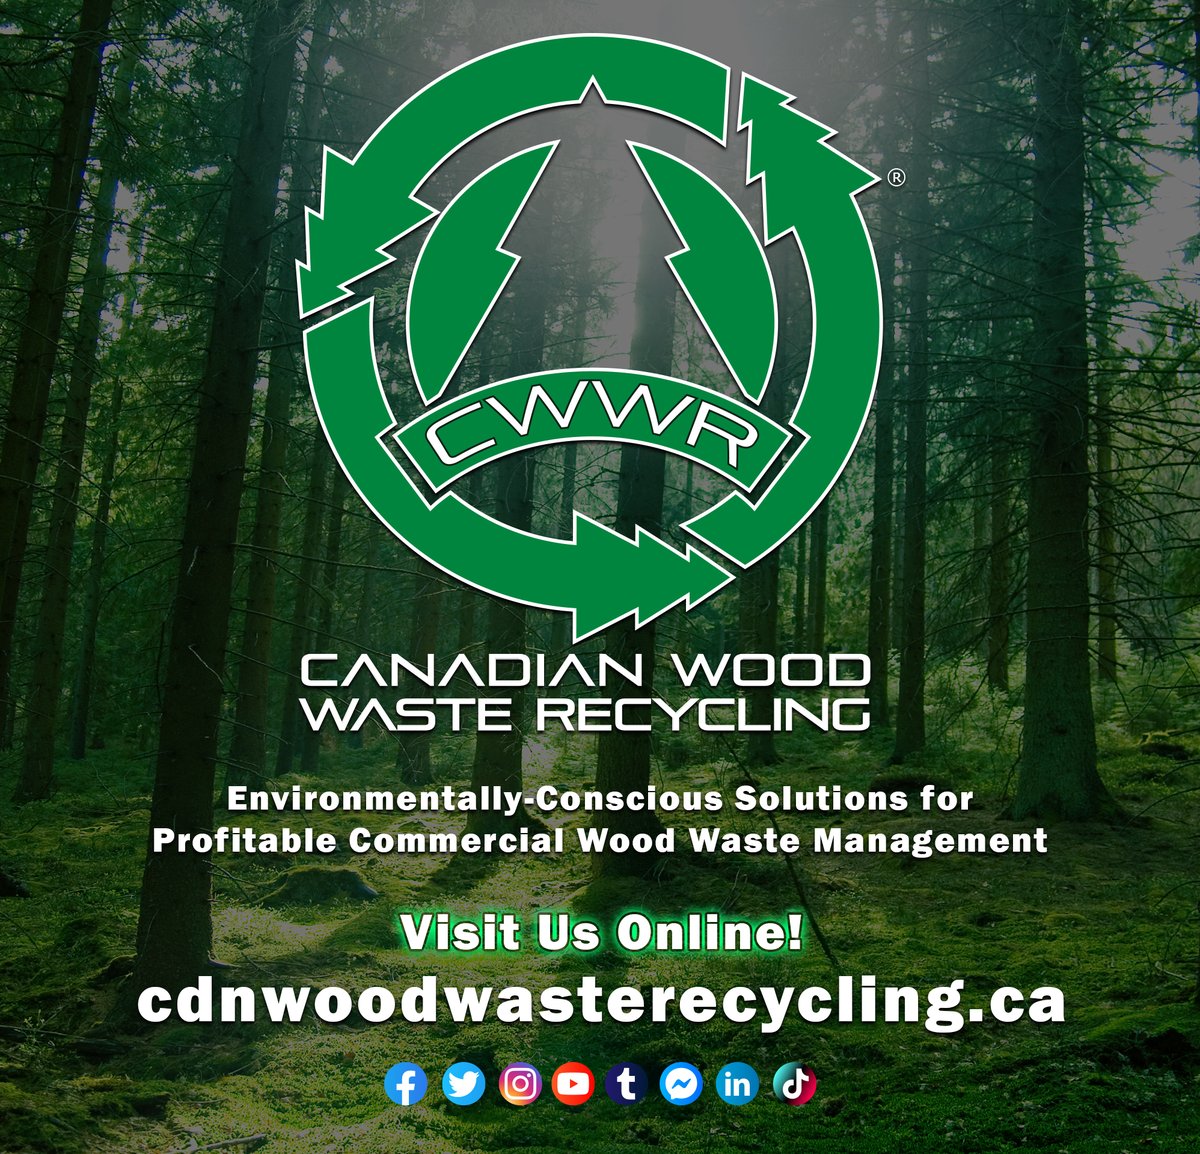 🍃 Transforming Wood Waste into Opportunities 🍃
We equip you with the tools to grow your recycling business, drive economic and environmental success.🌿💼 🔗 cdnwoodwasterecycling.ca #WoodRecycling #Sustainability #EcoInnovation #CanadianBusiness